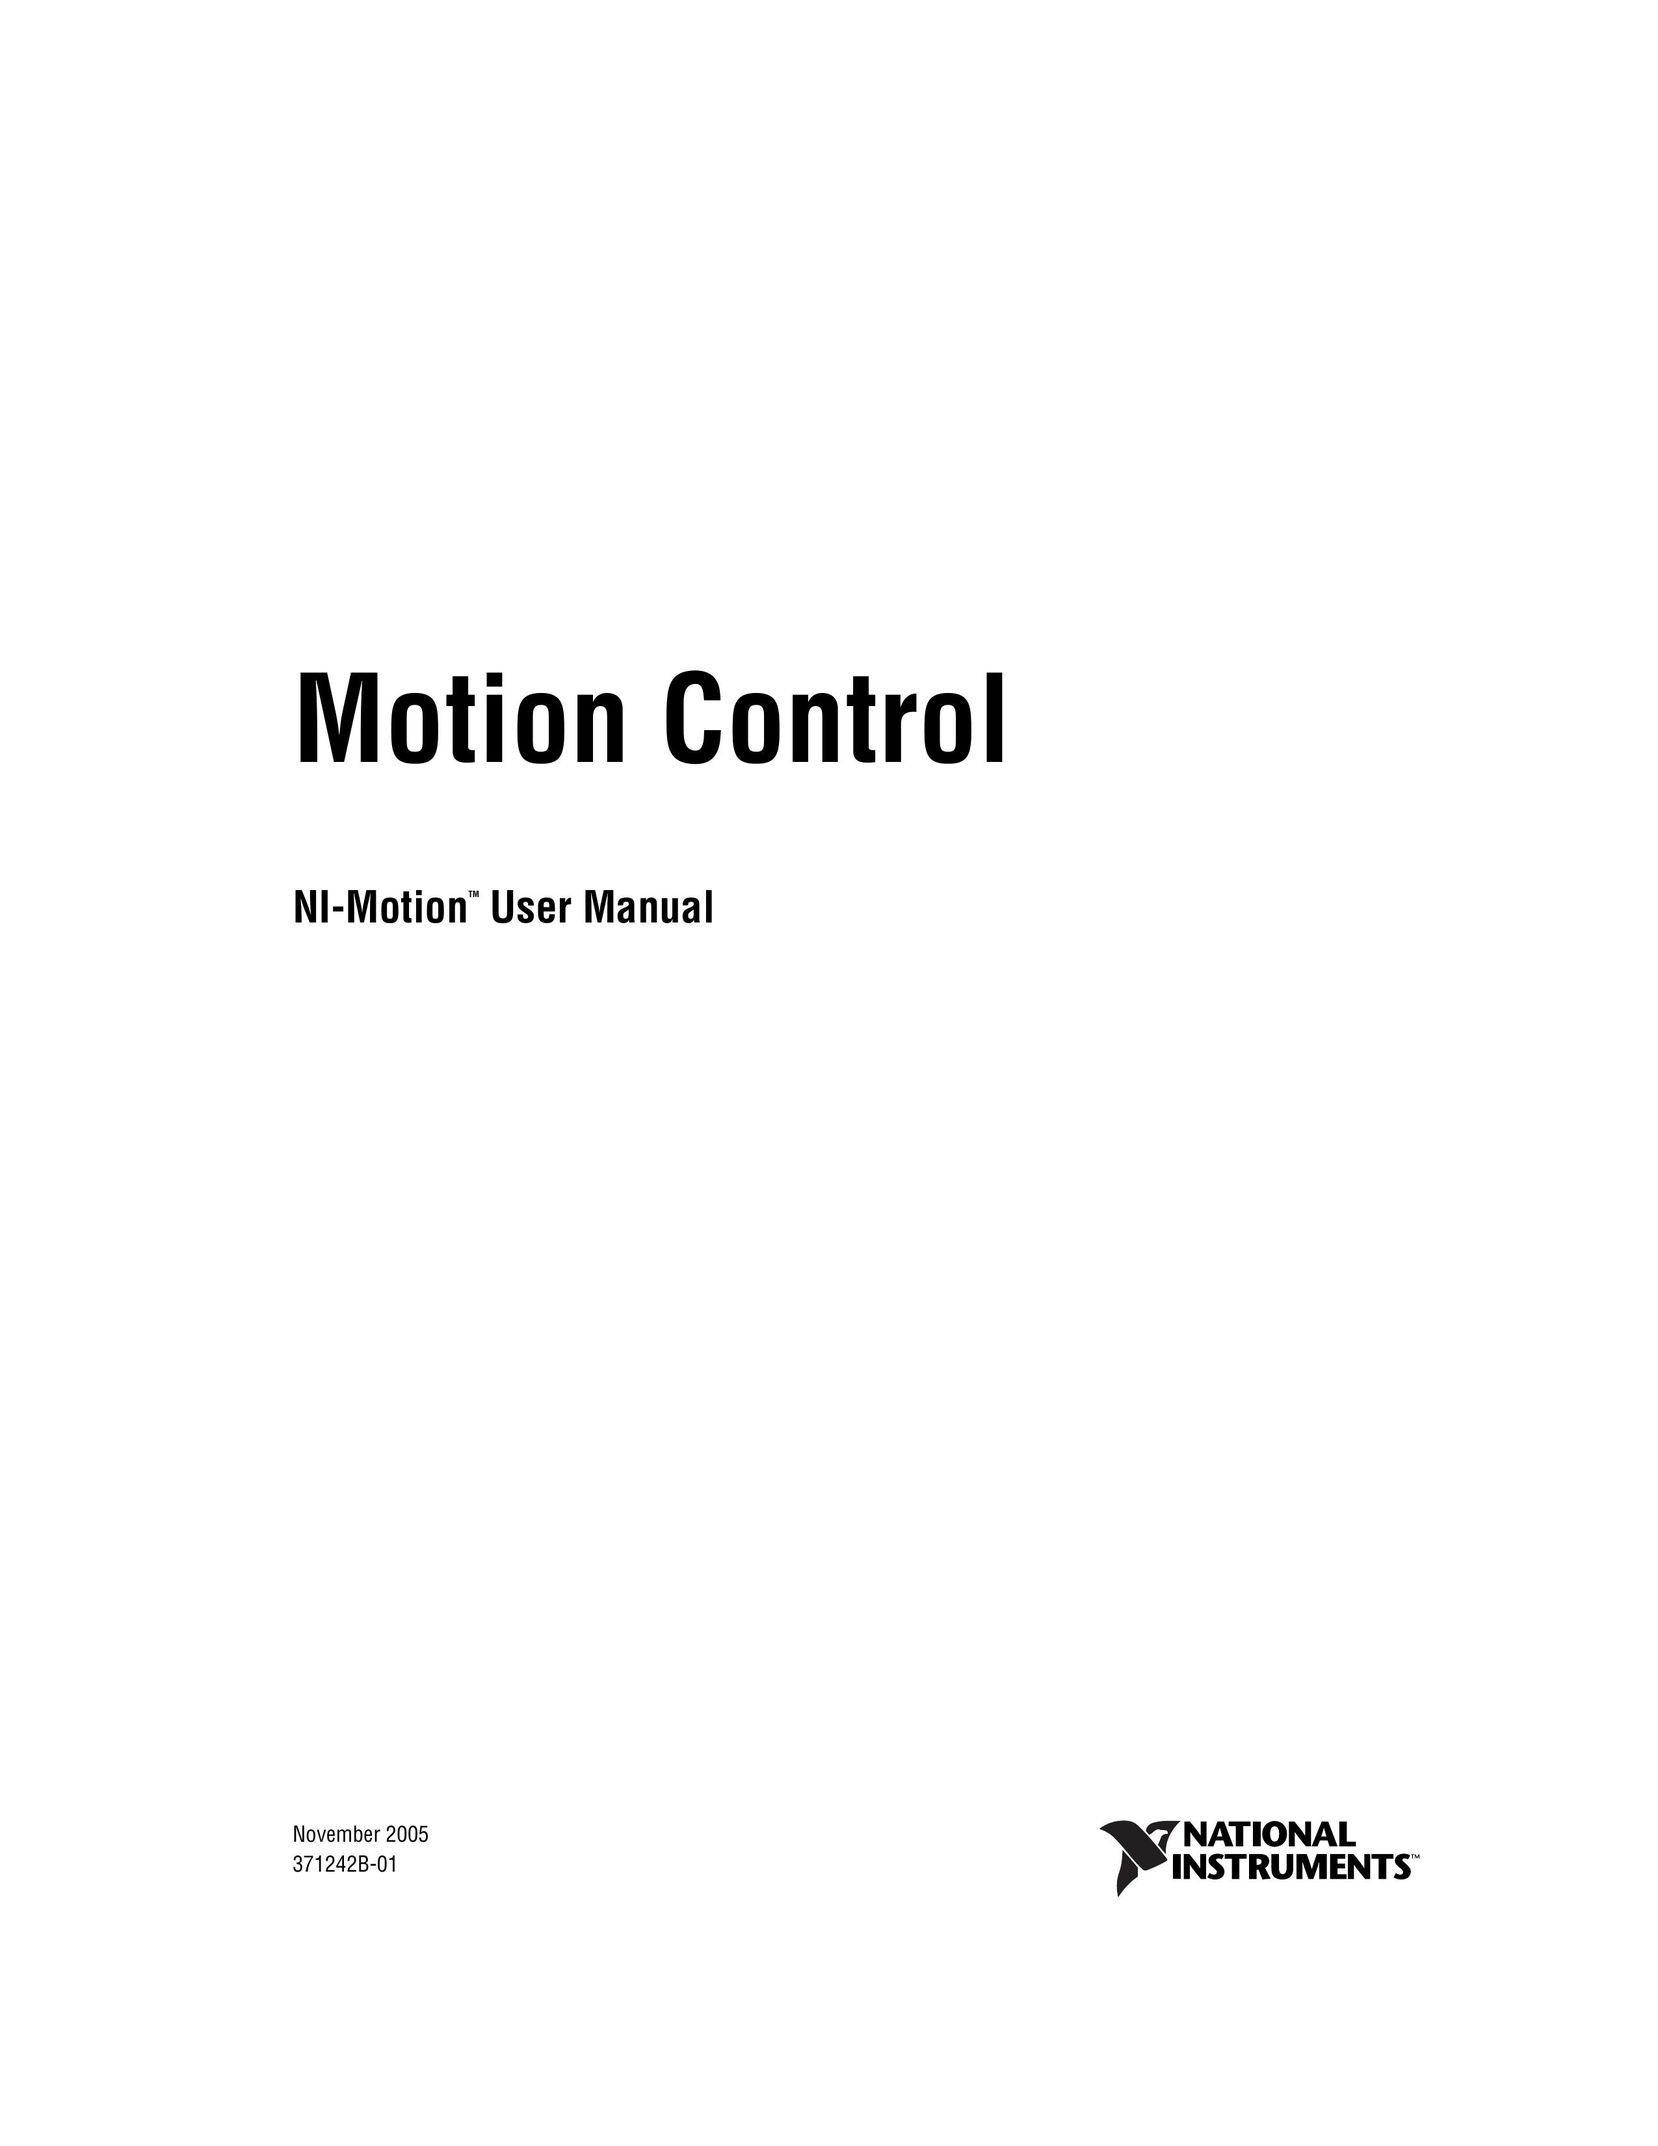 National Instruments NI-Motion Home Safety Product User Manual